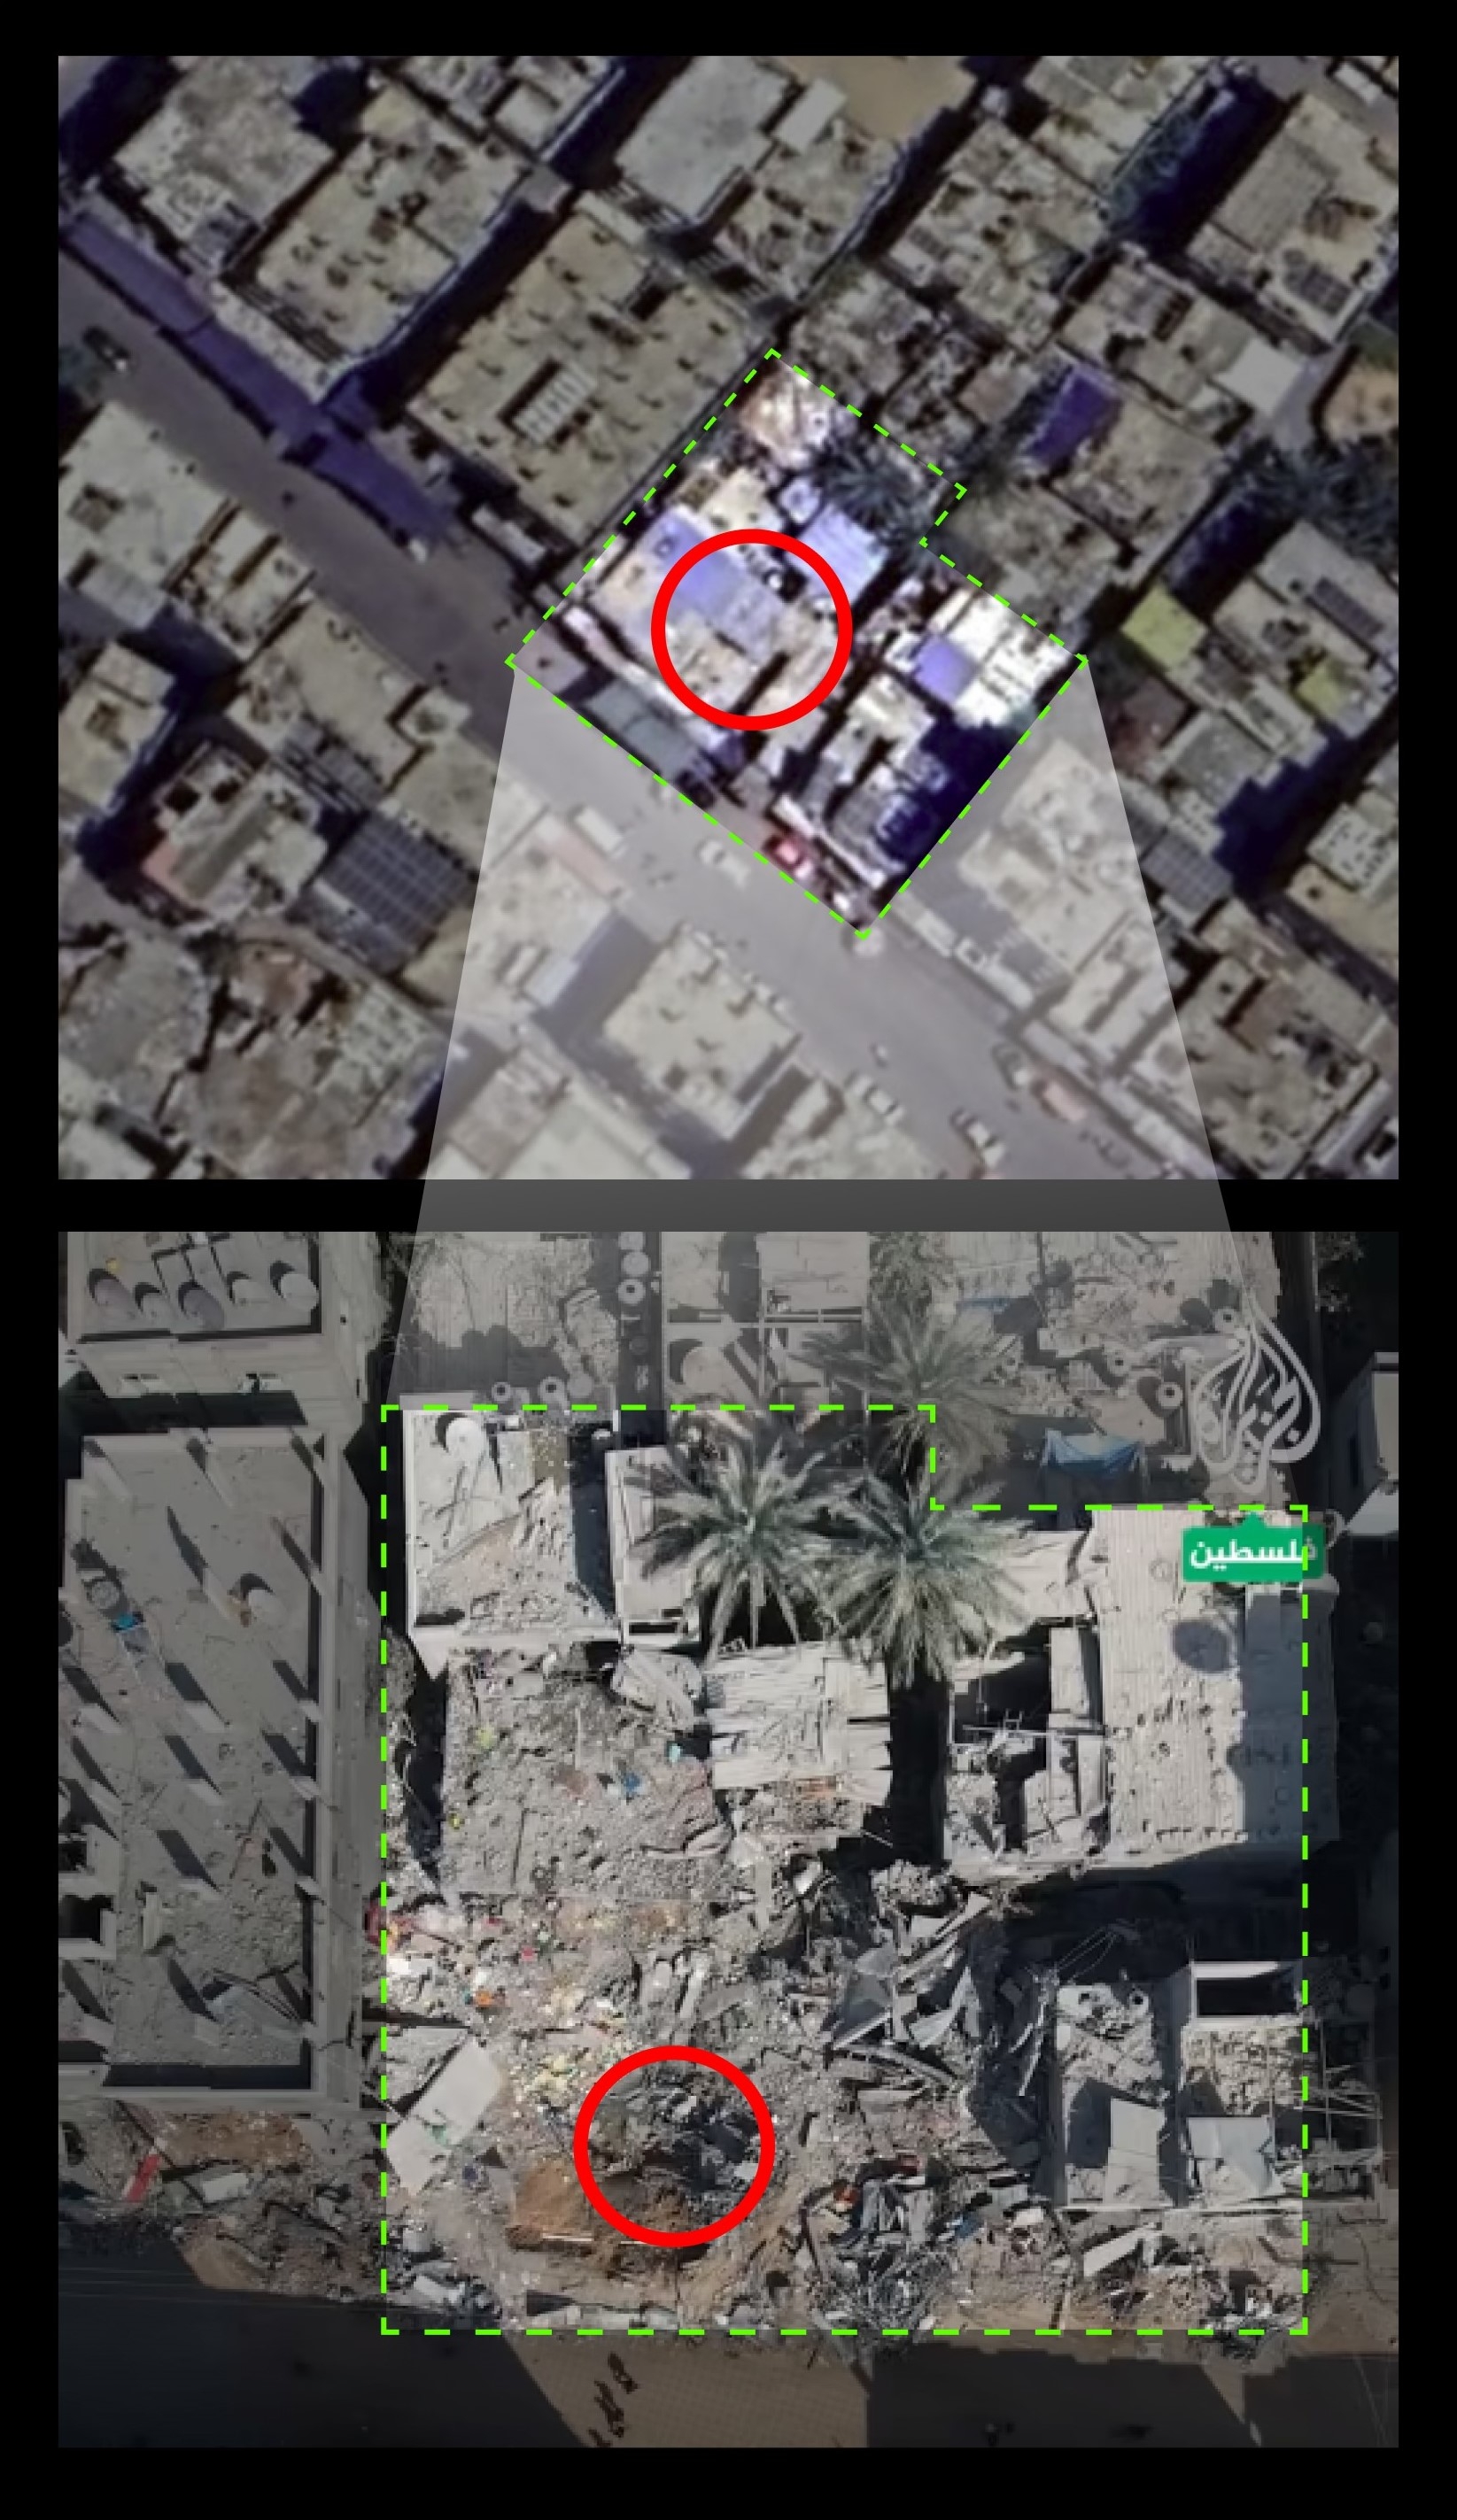 Comparison between satellite imagery and images from aerial footage.